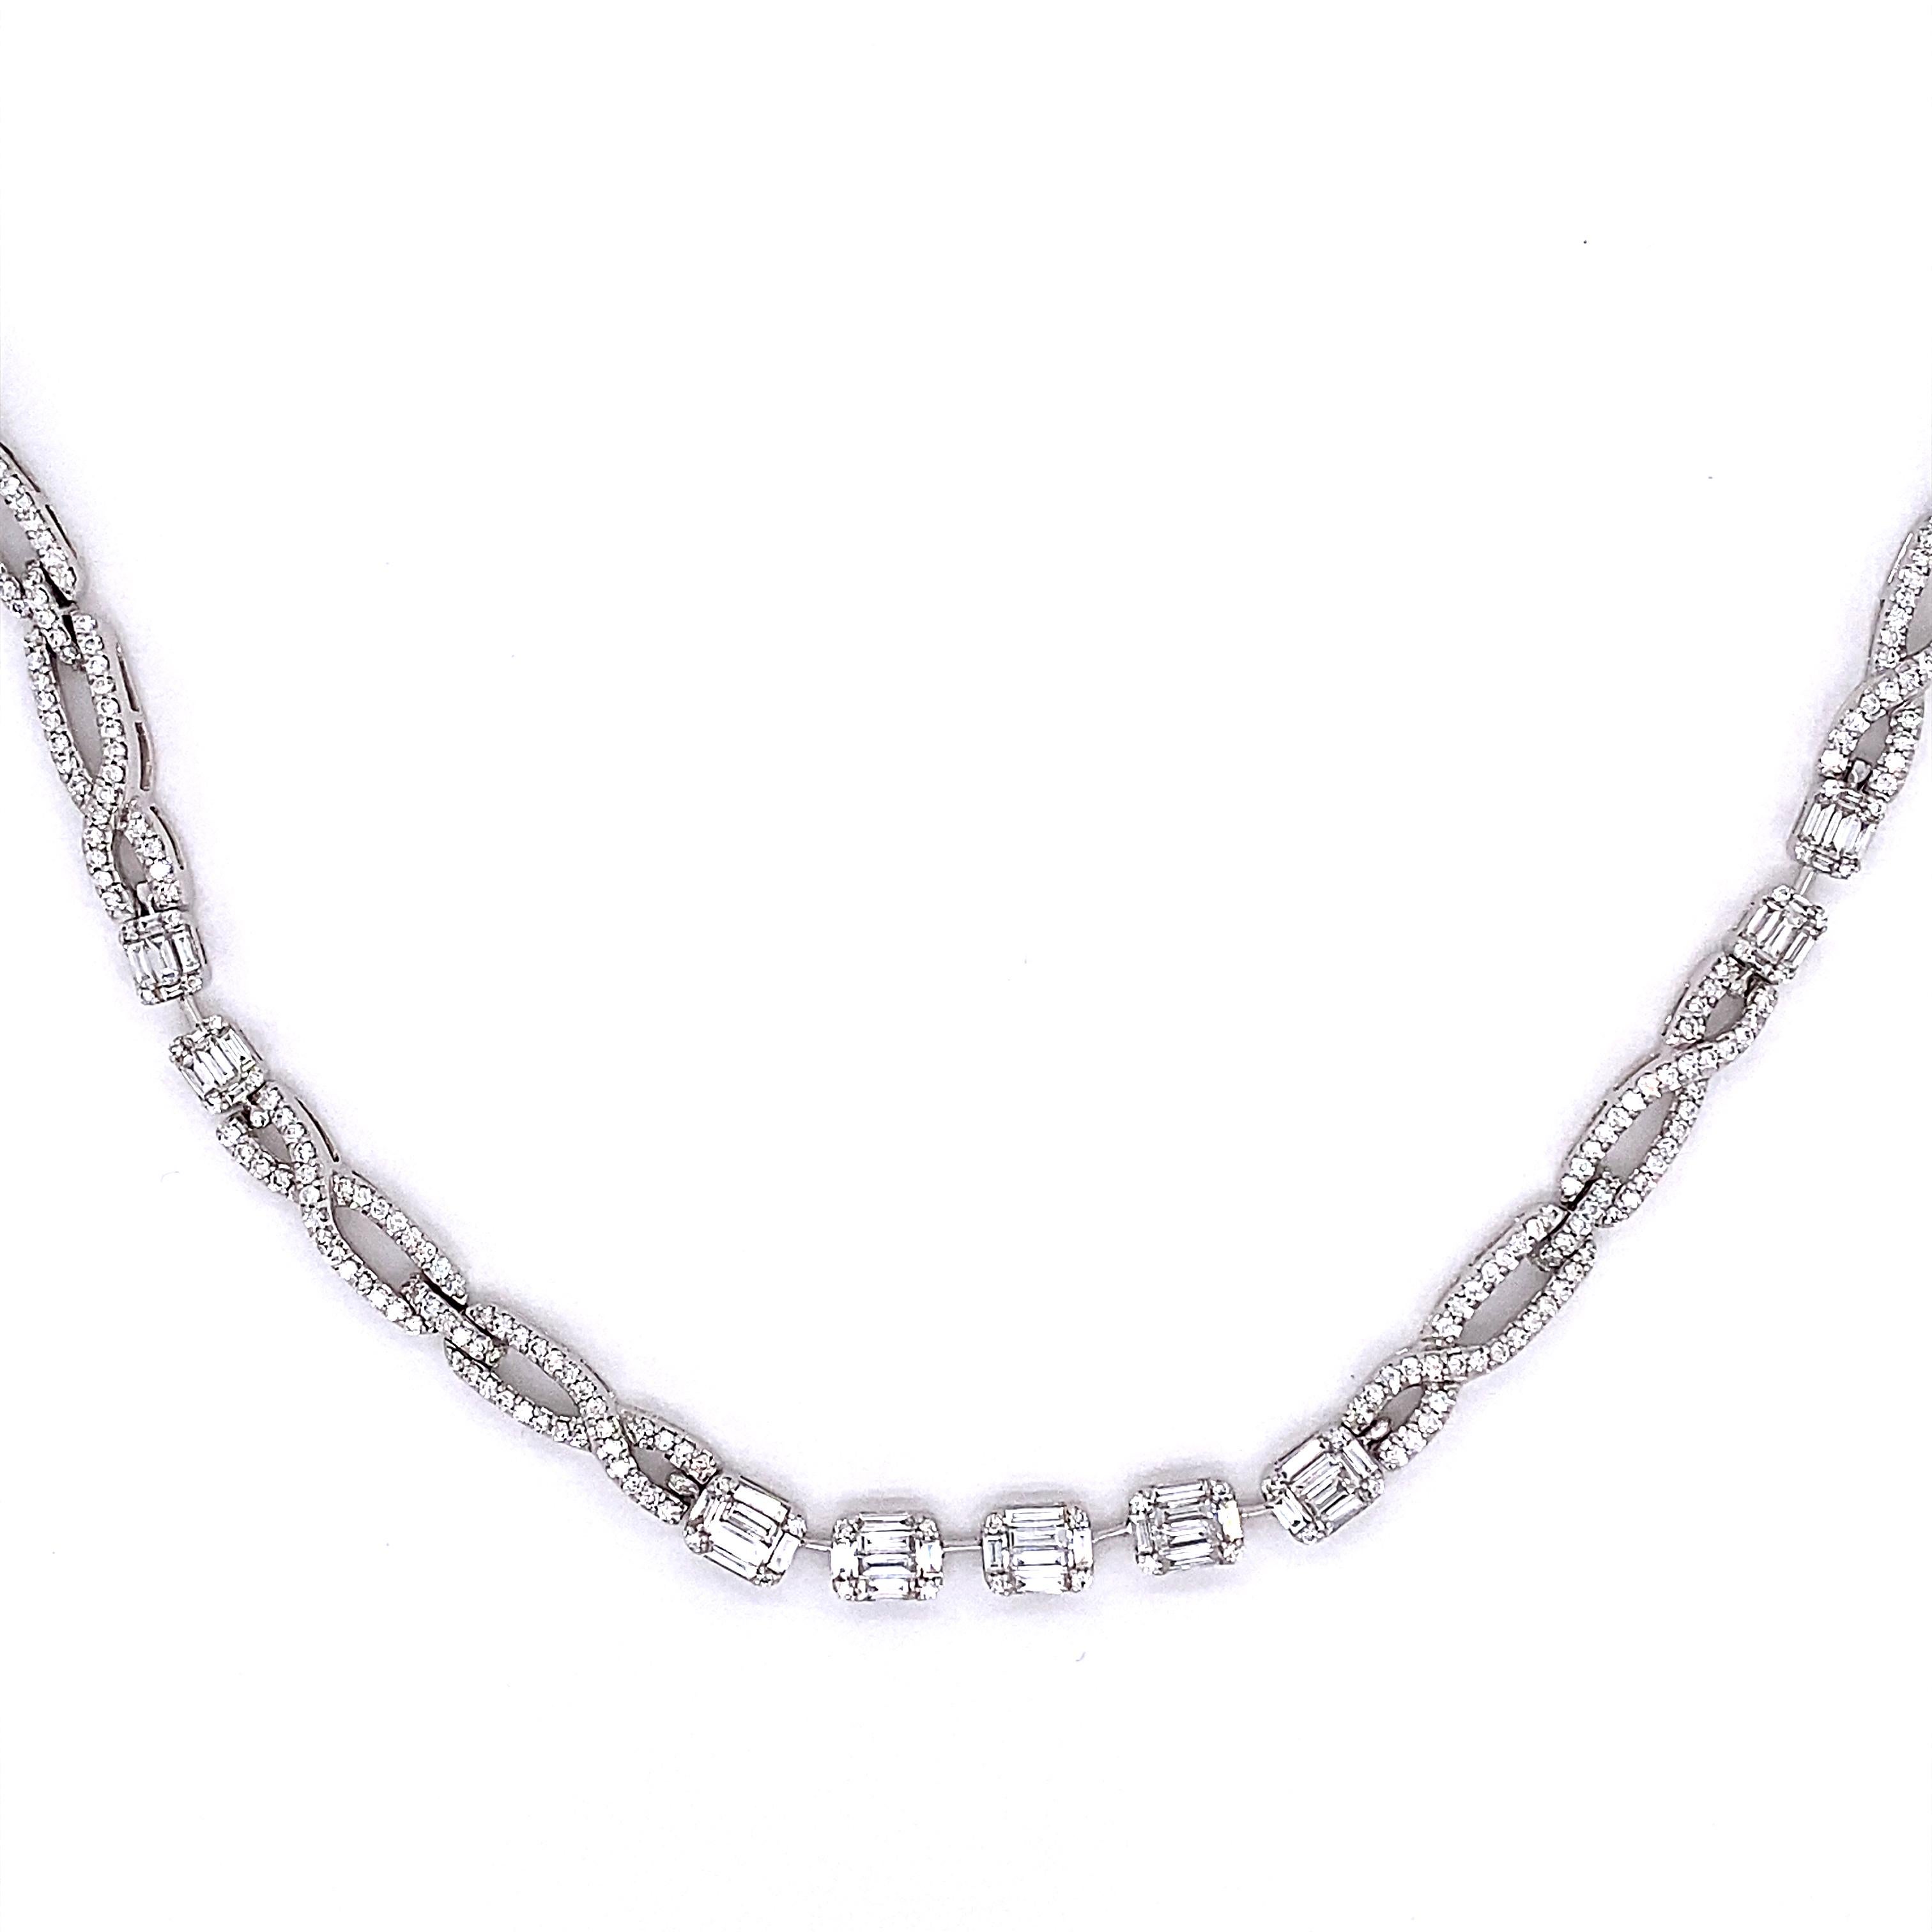 This stunning necklace features 13 emerald cut diamond clusters. The clusters are separated by a infinity designs made of round white diamonds. This necklace is 18